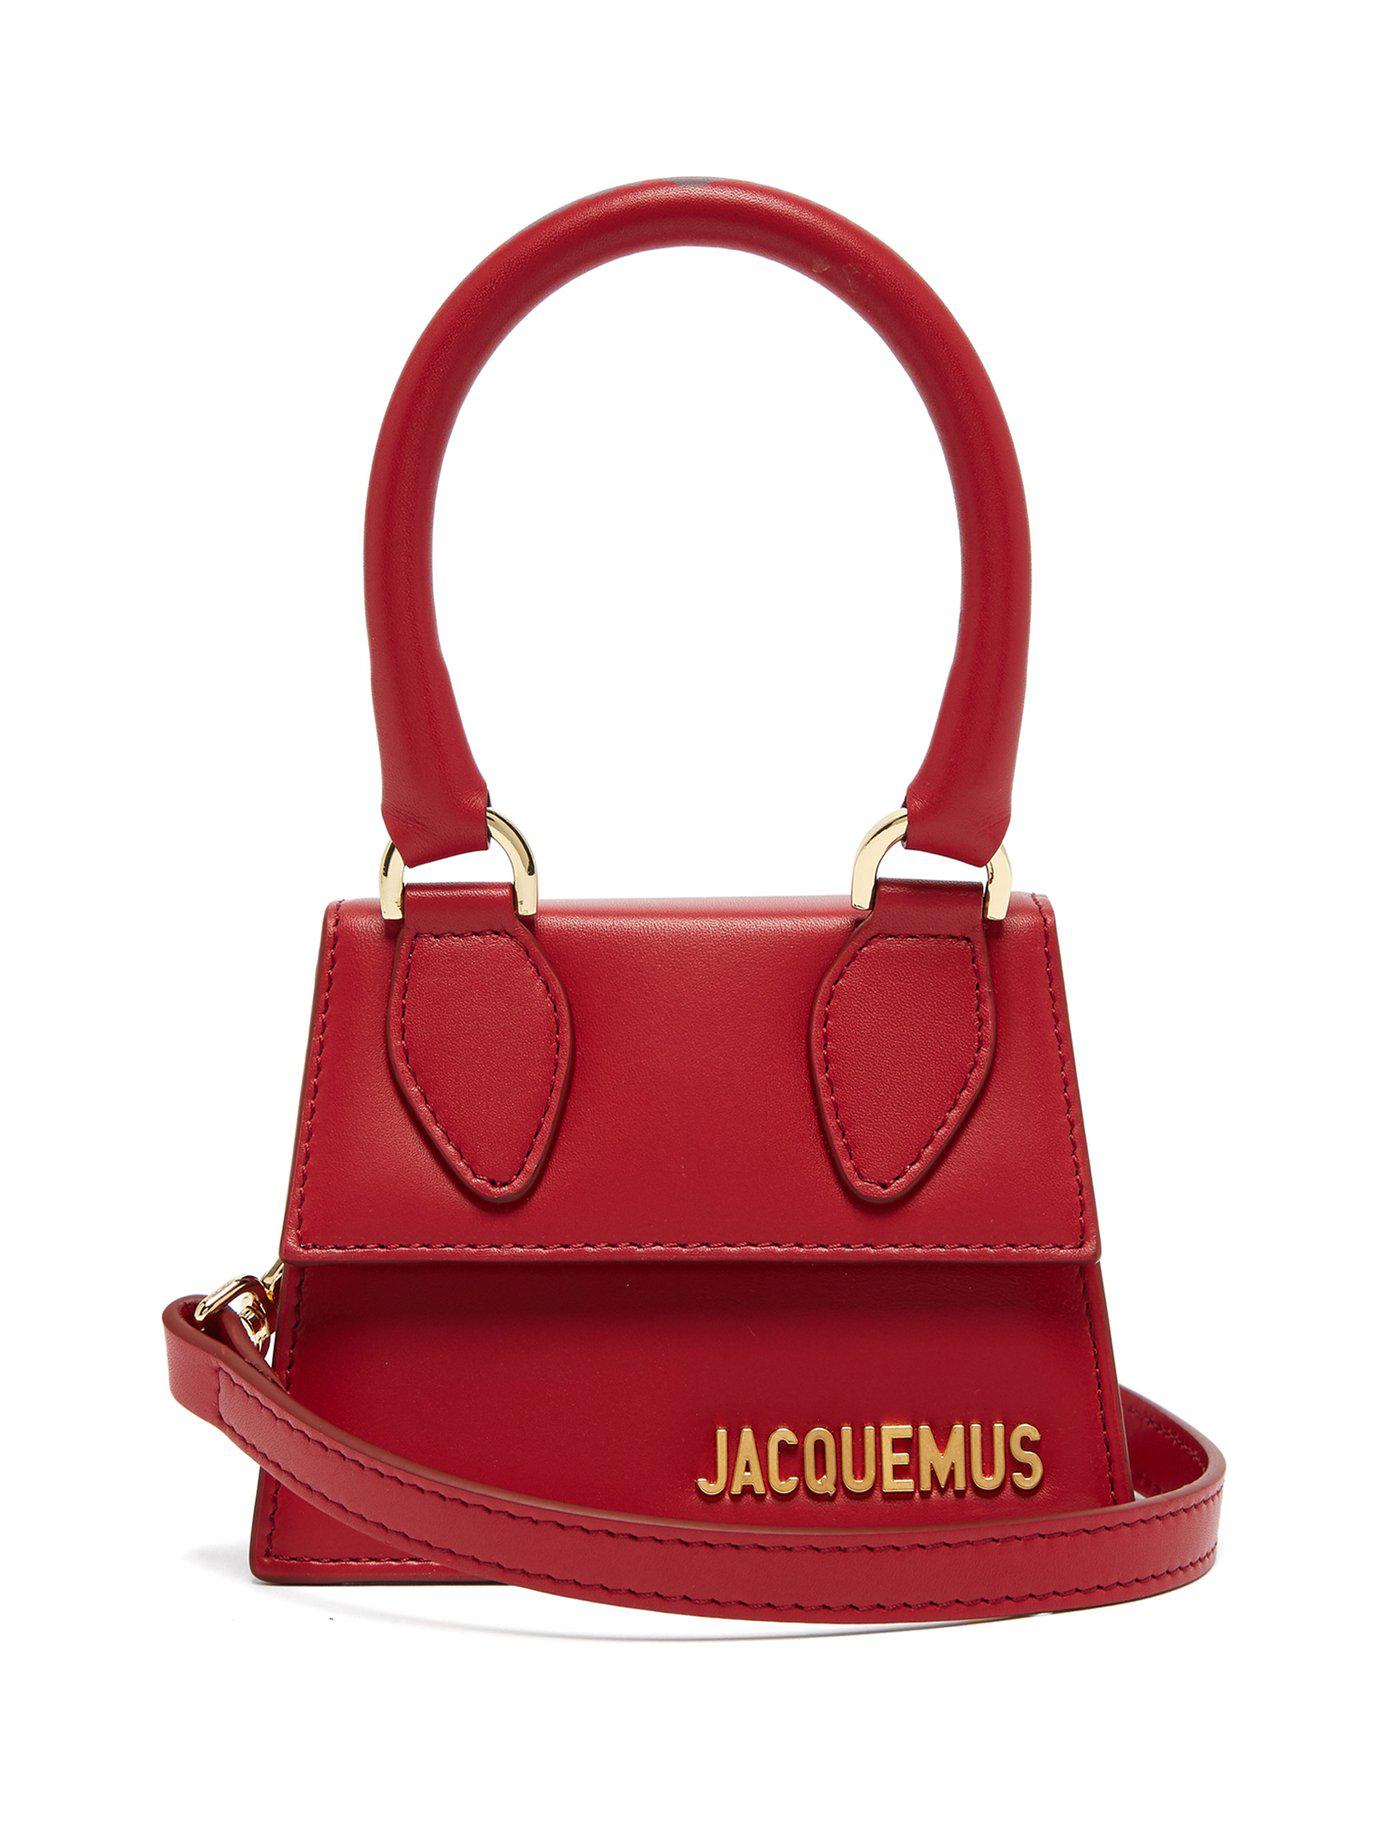 Jacquemus Le Chiquita Leather Micro Bag in Red - Lyst